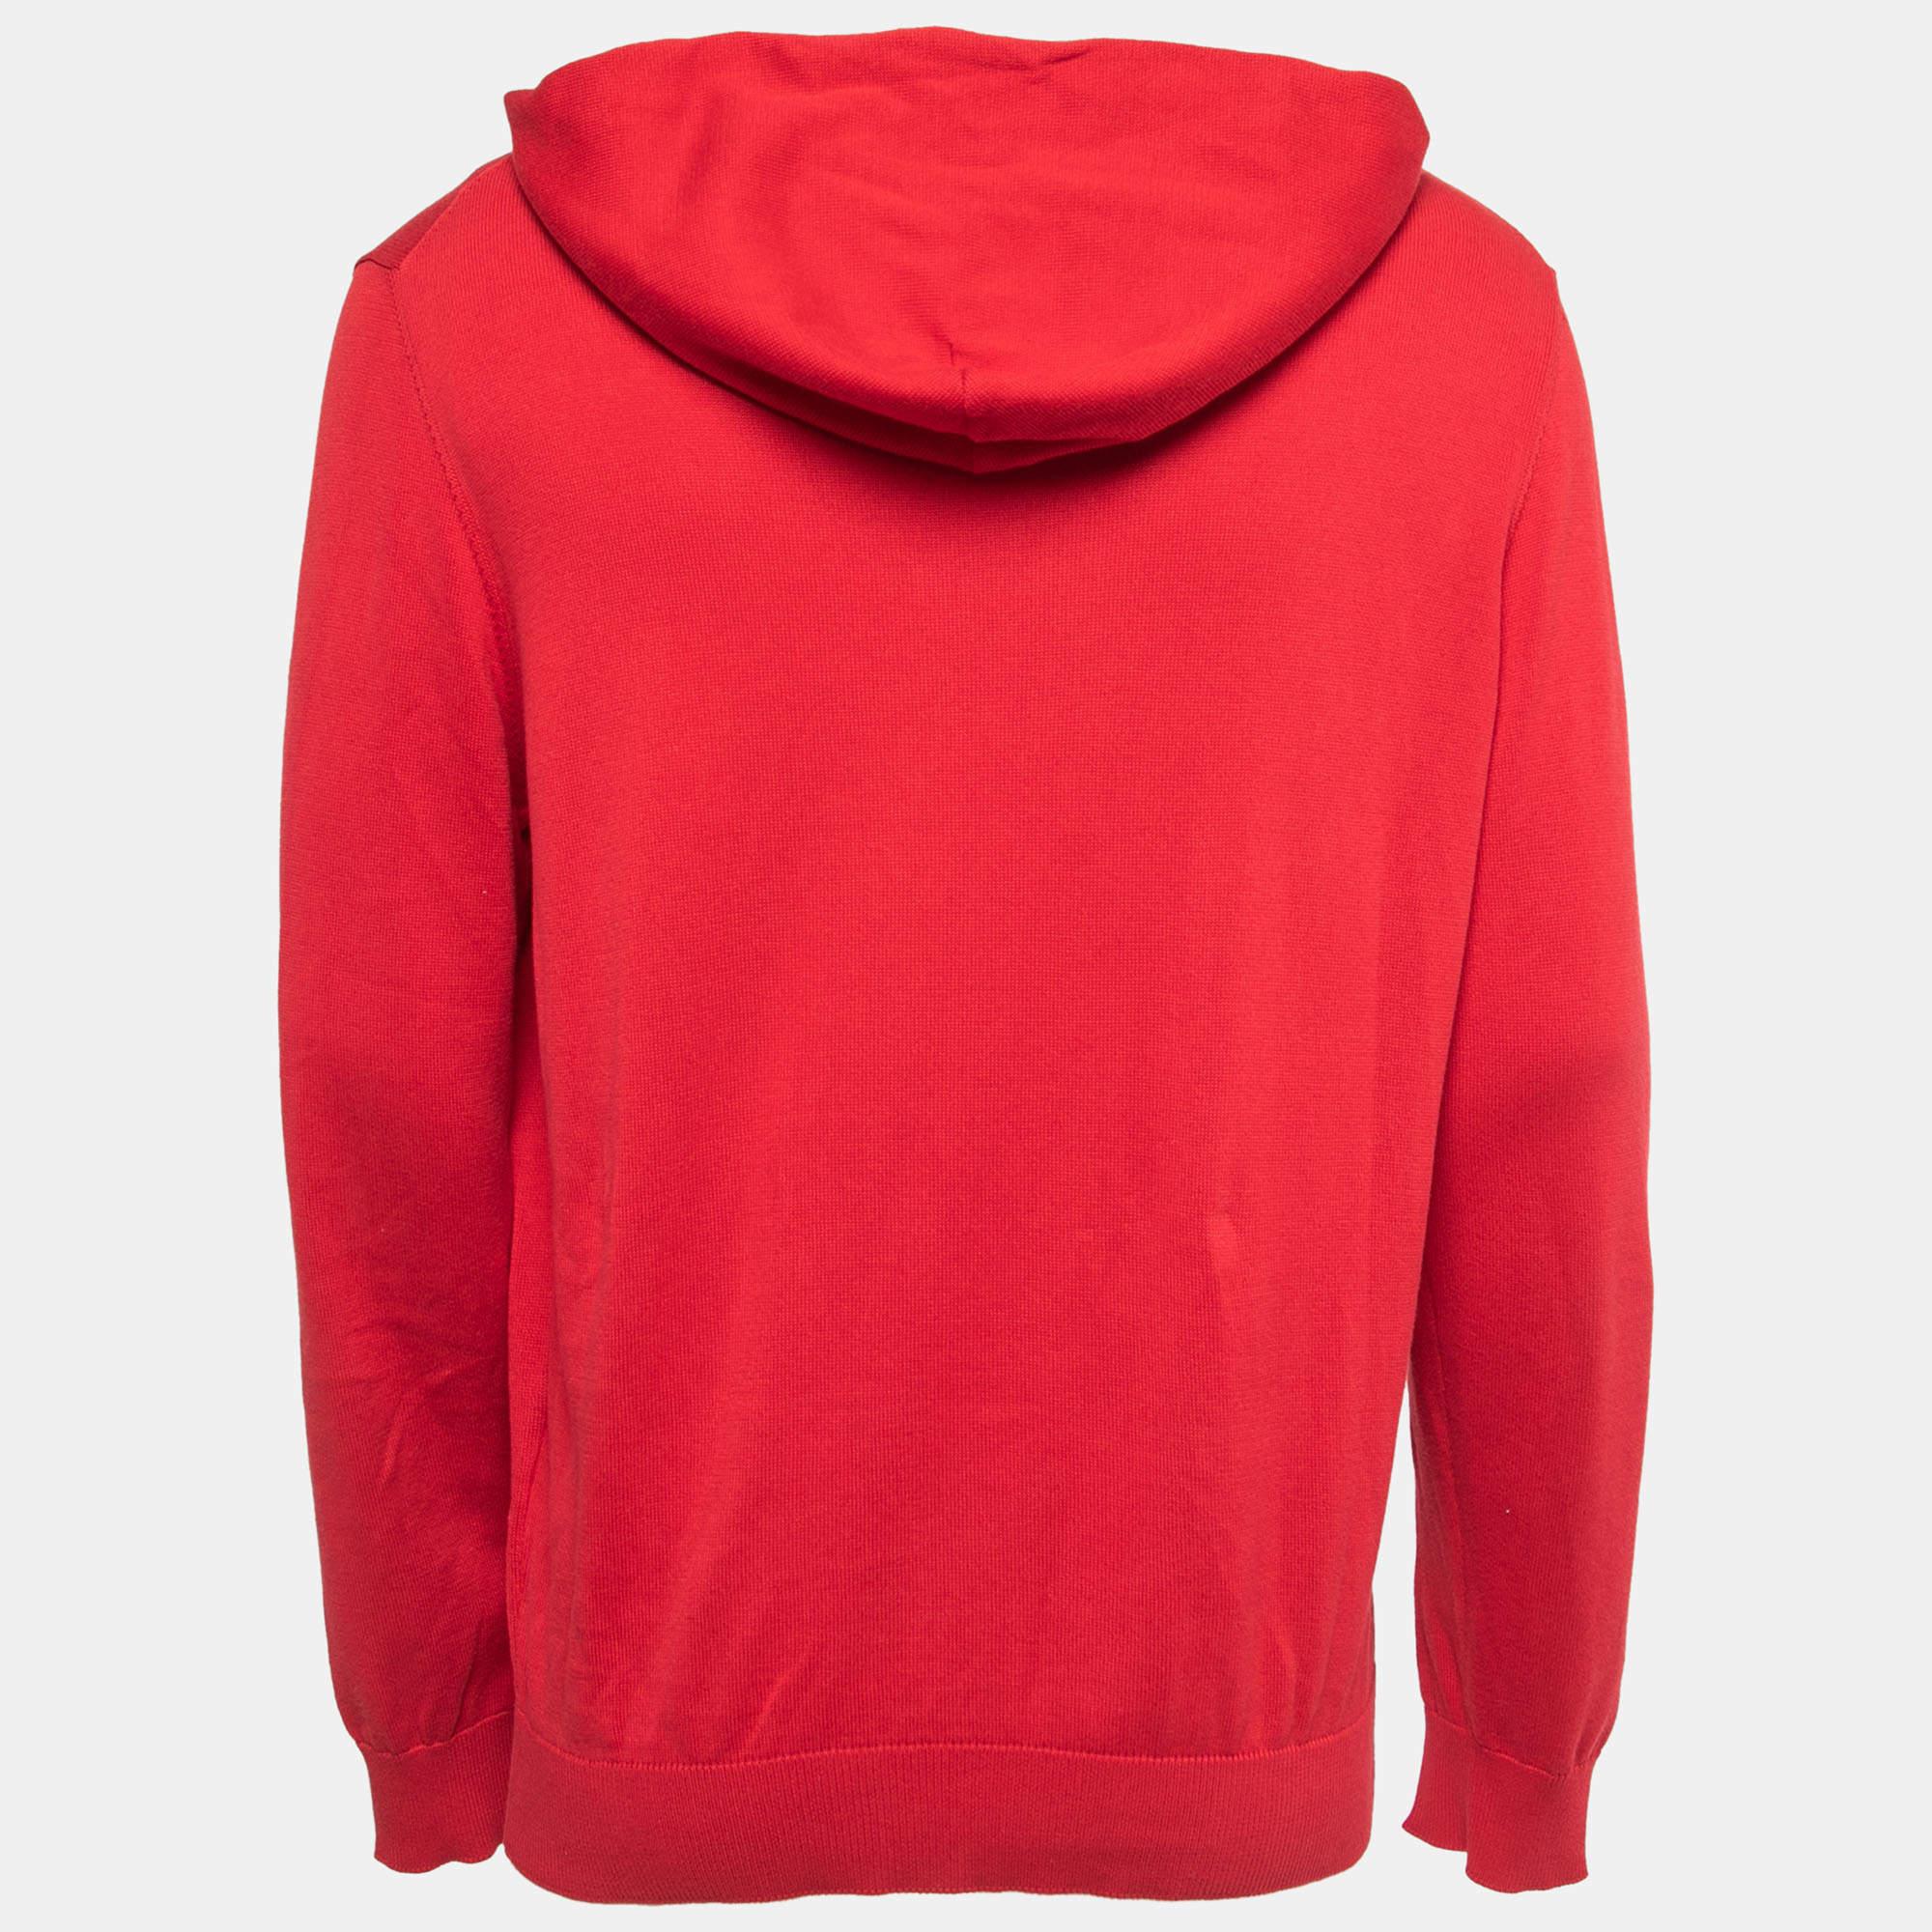 The Louis Vuitton sweater is a luxurious and stylish garment crafted with a blend of cotton and silk. It features a vibrant red color and showcases the iconic Louis Vuitton logo pattern. With a comfortable hood and knit construction, this sweater